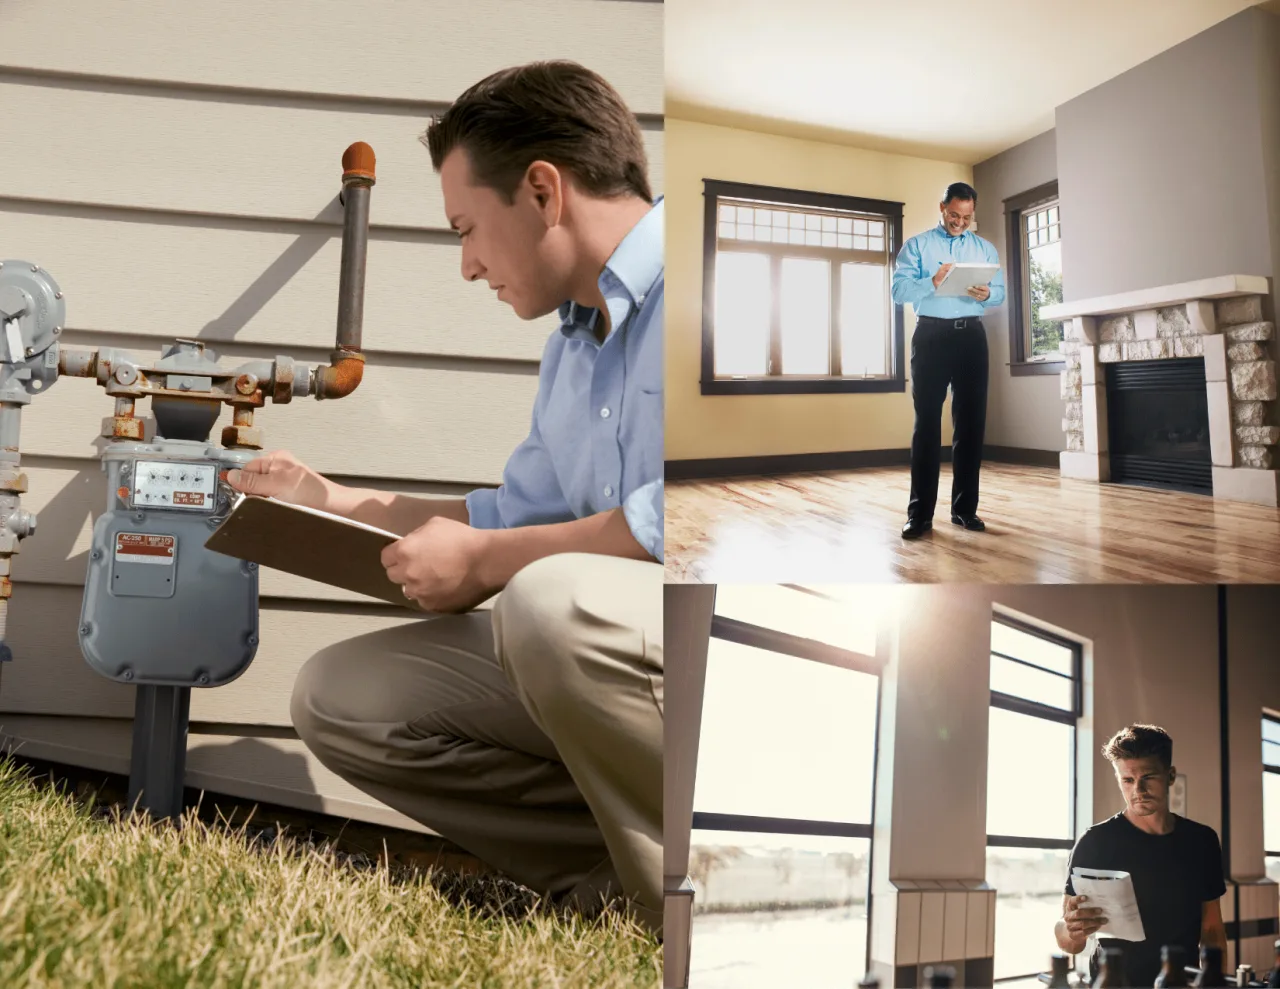 39 Things A Home Inspector Checks-What To Expect During A Home Inspection